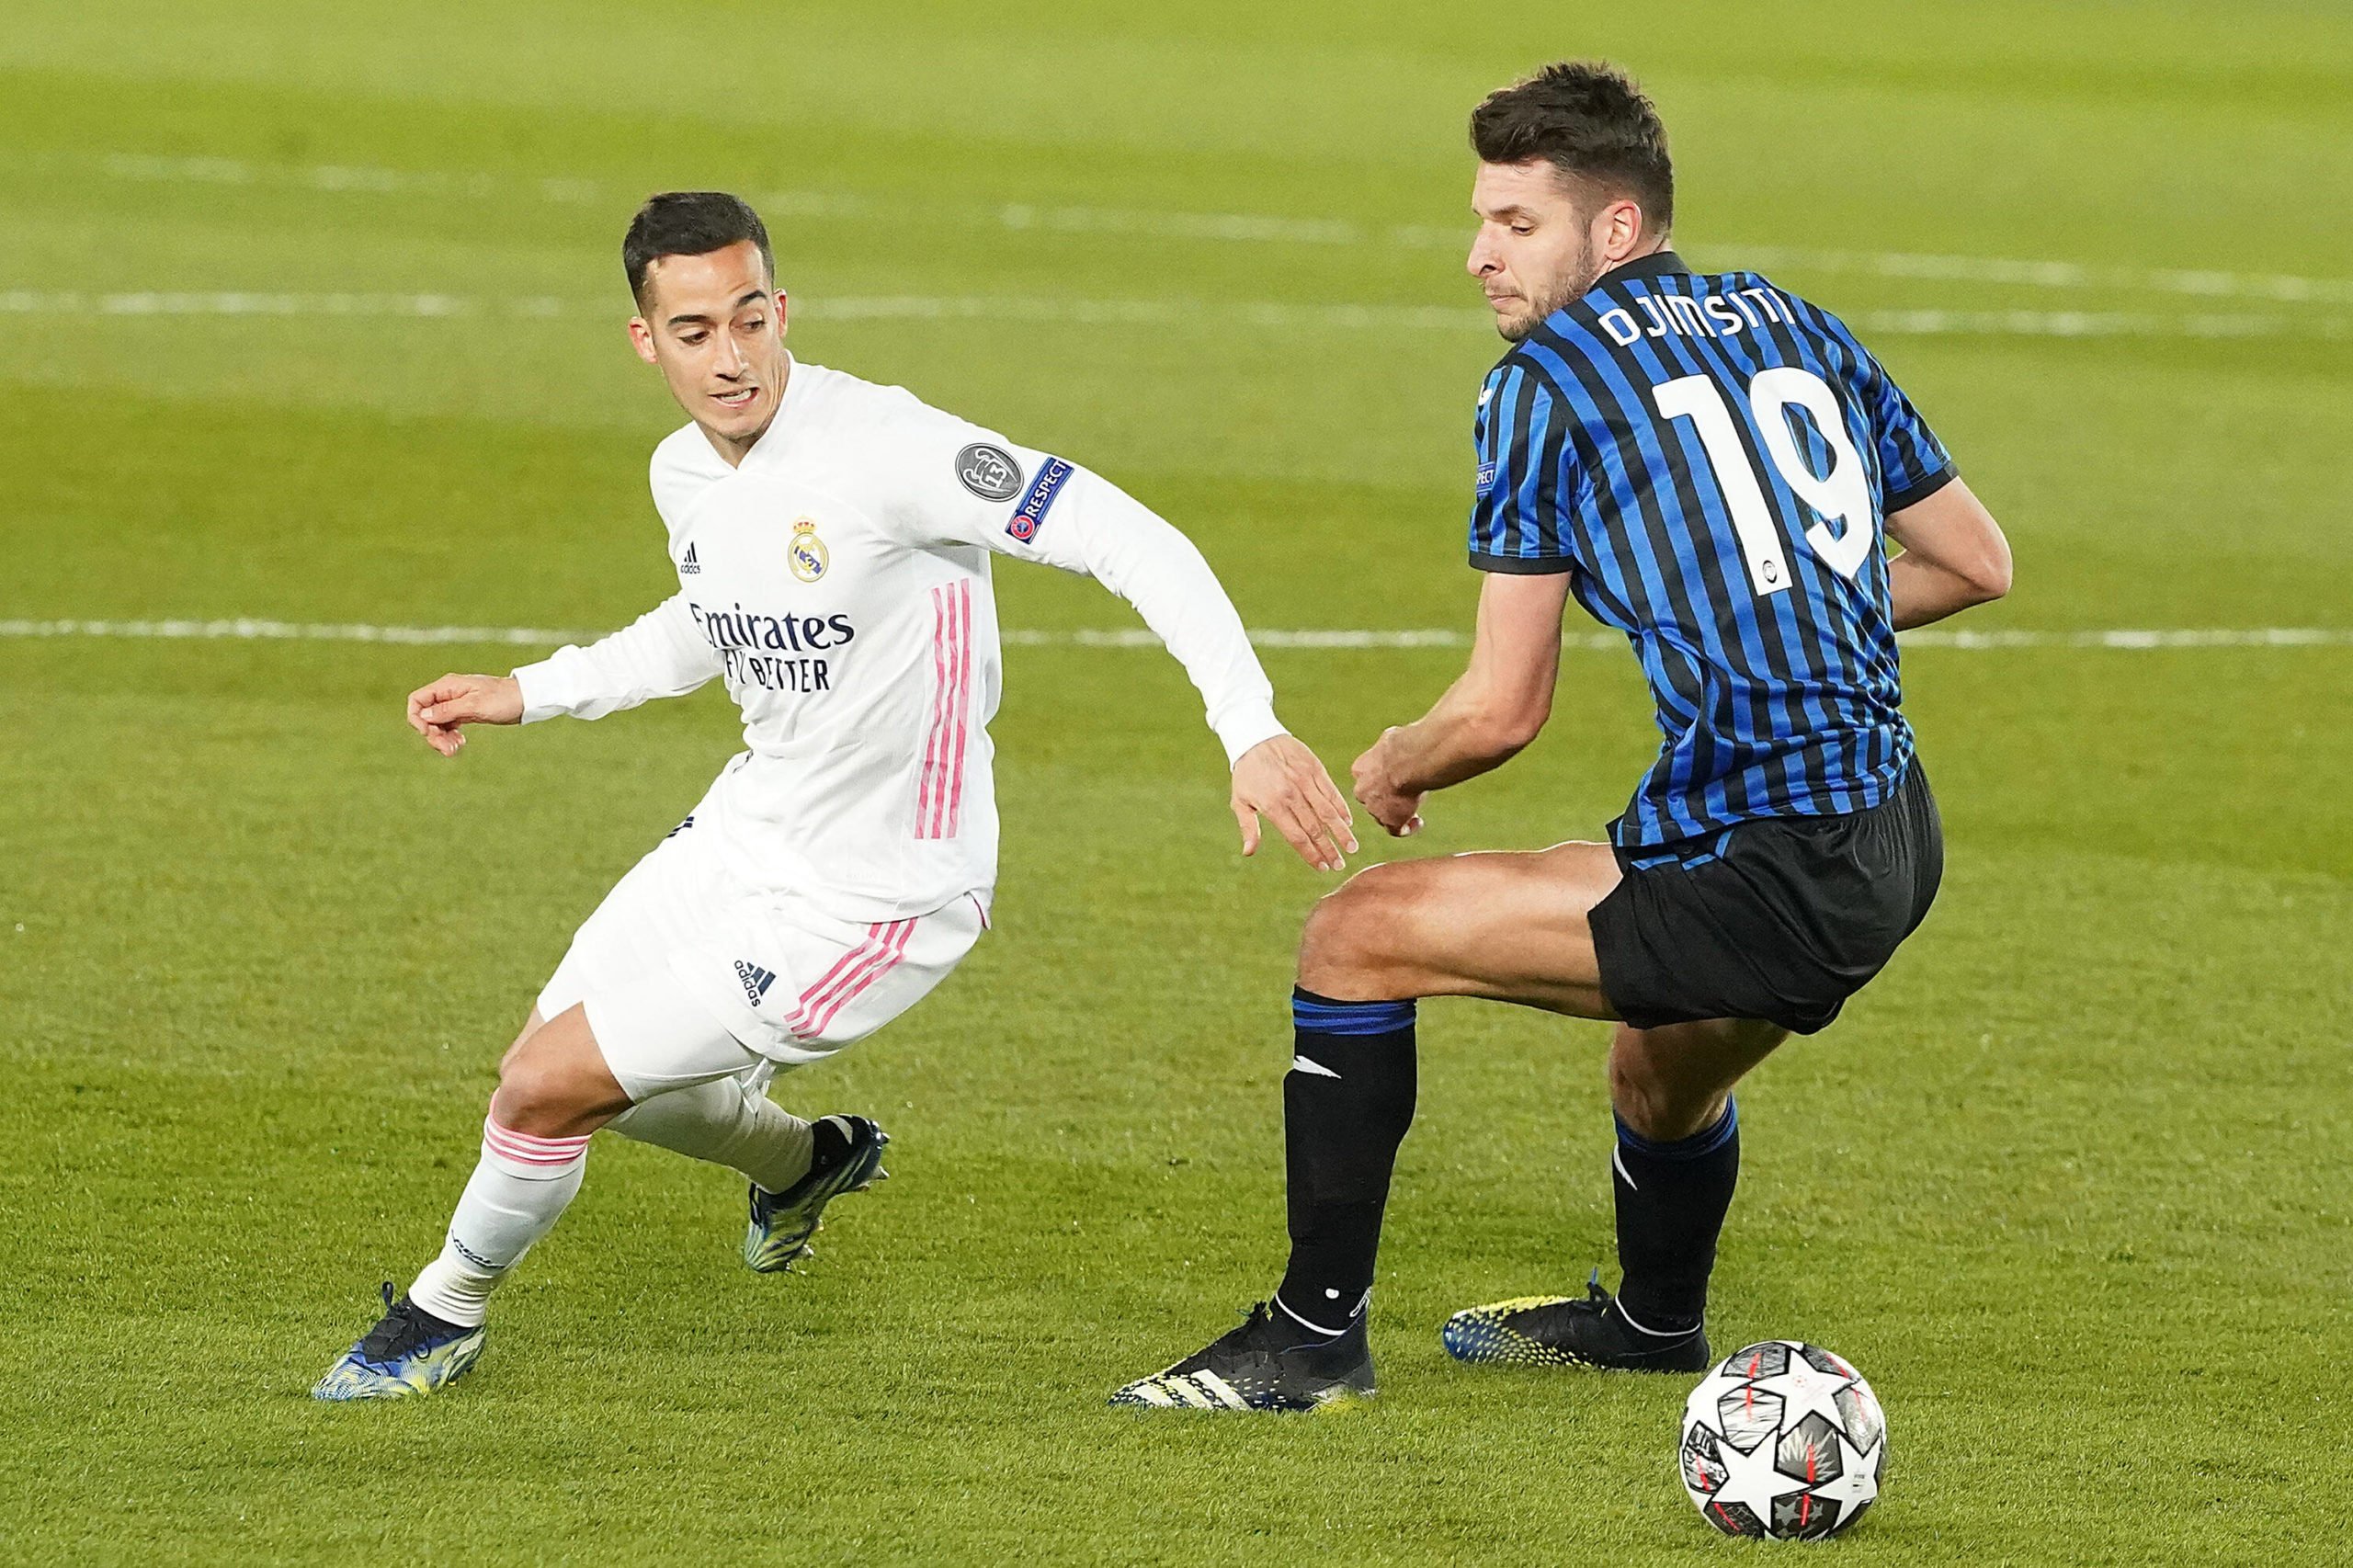 Real Madrid's Vazquez close to penning a three-year deal (Vazquez is seen in the picture)